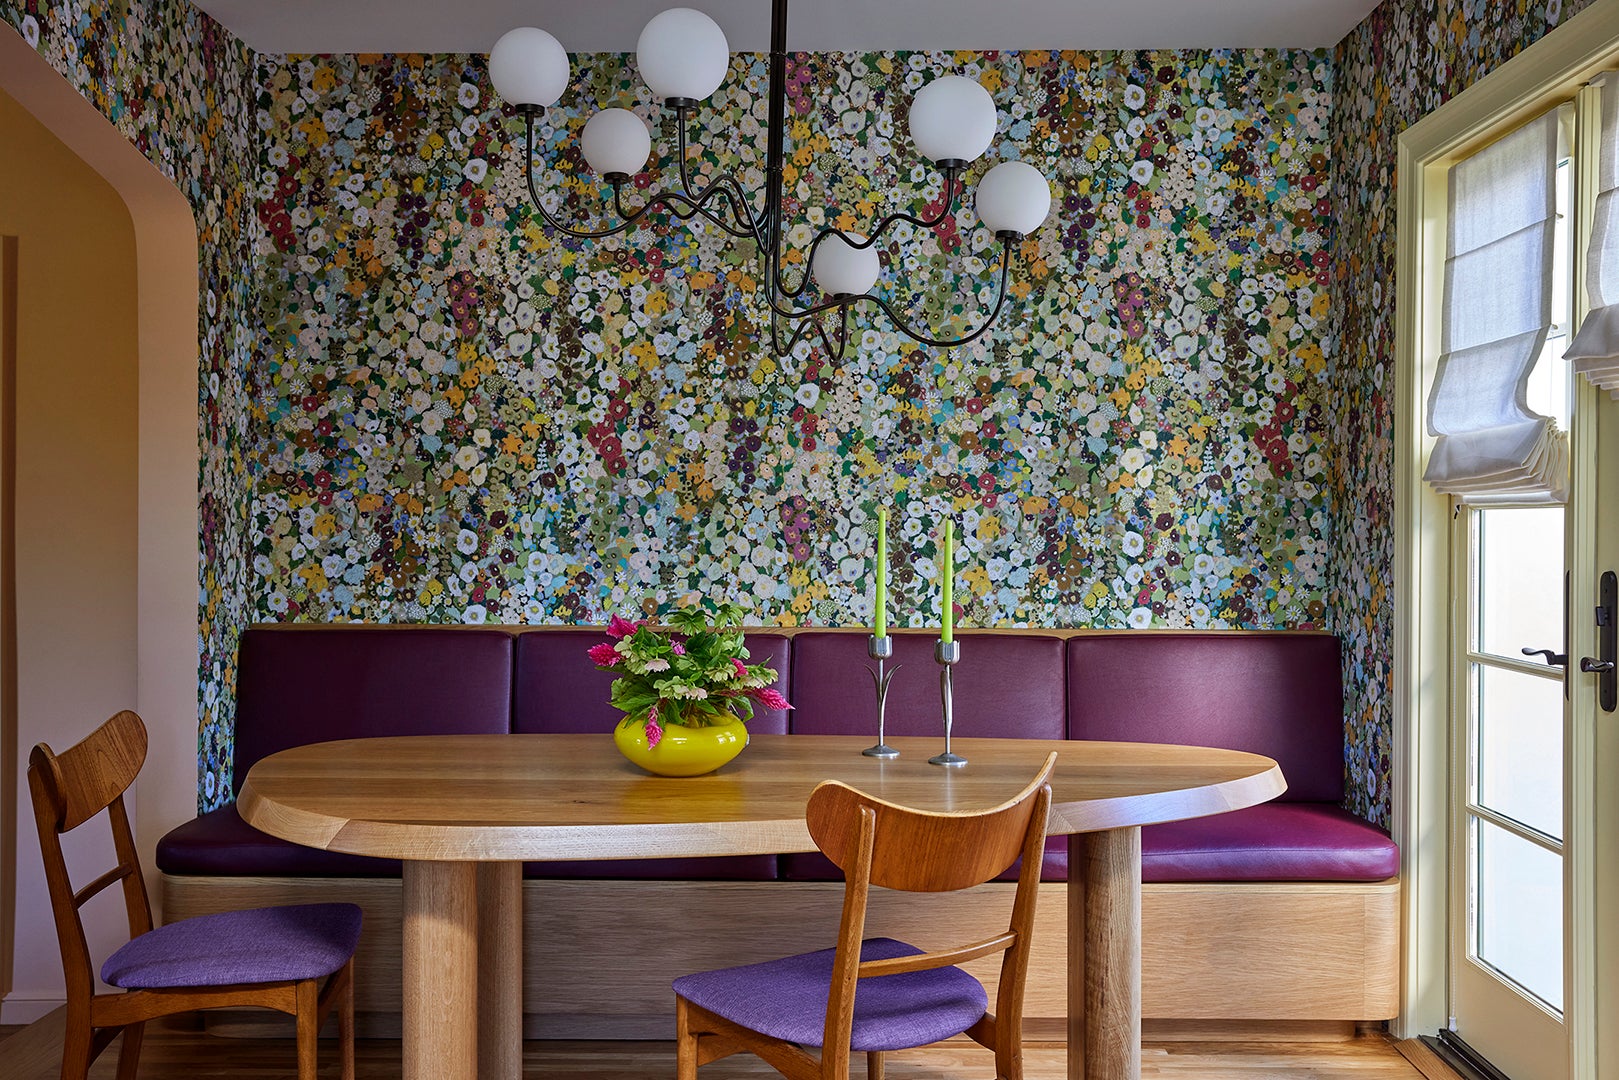 Dining room view of floral wallpaper and dining table